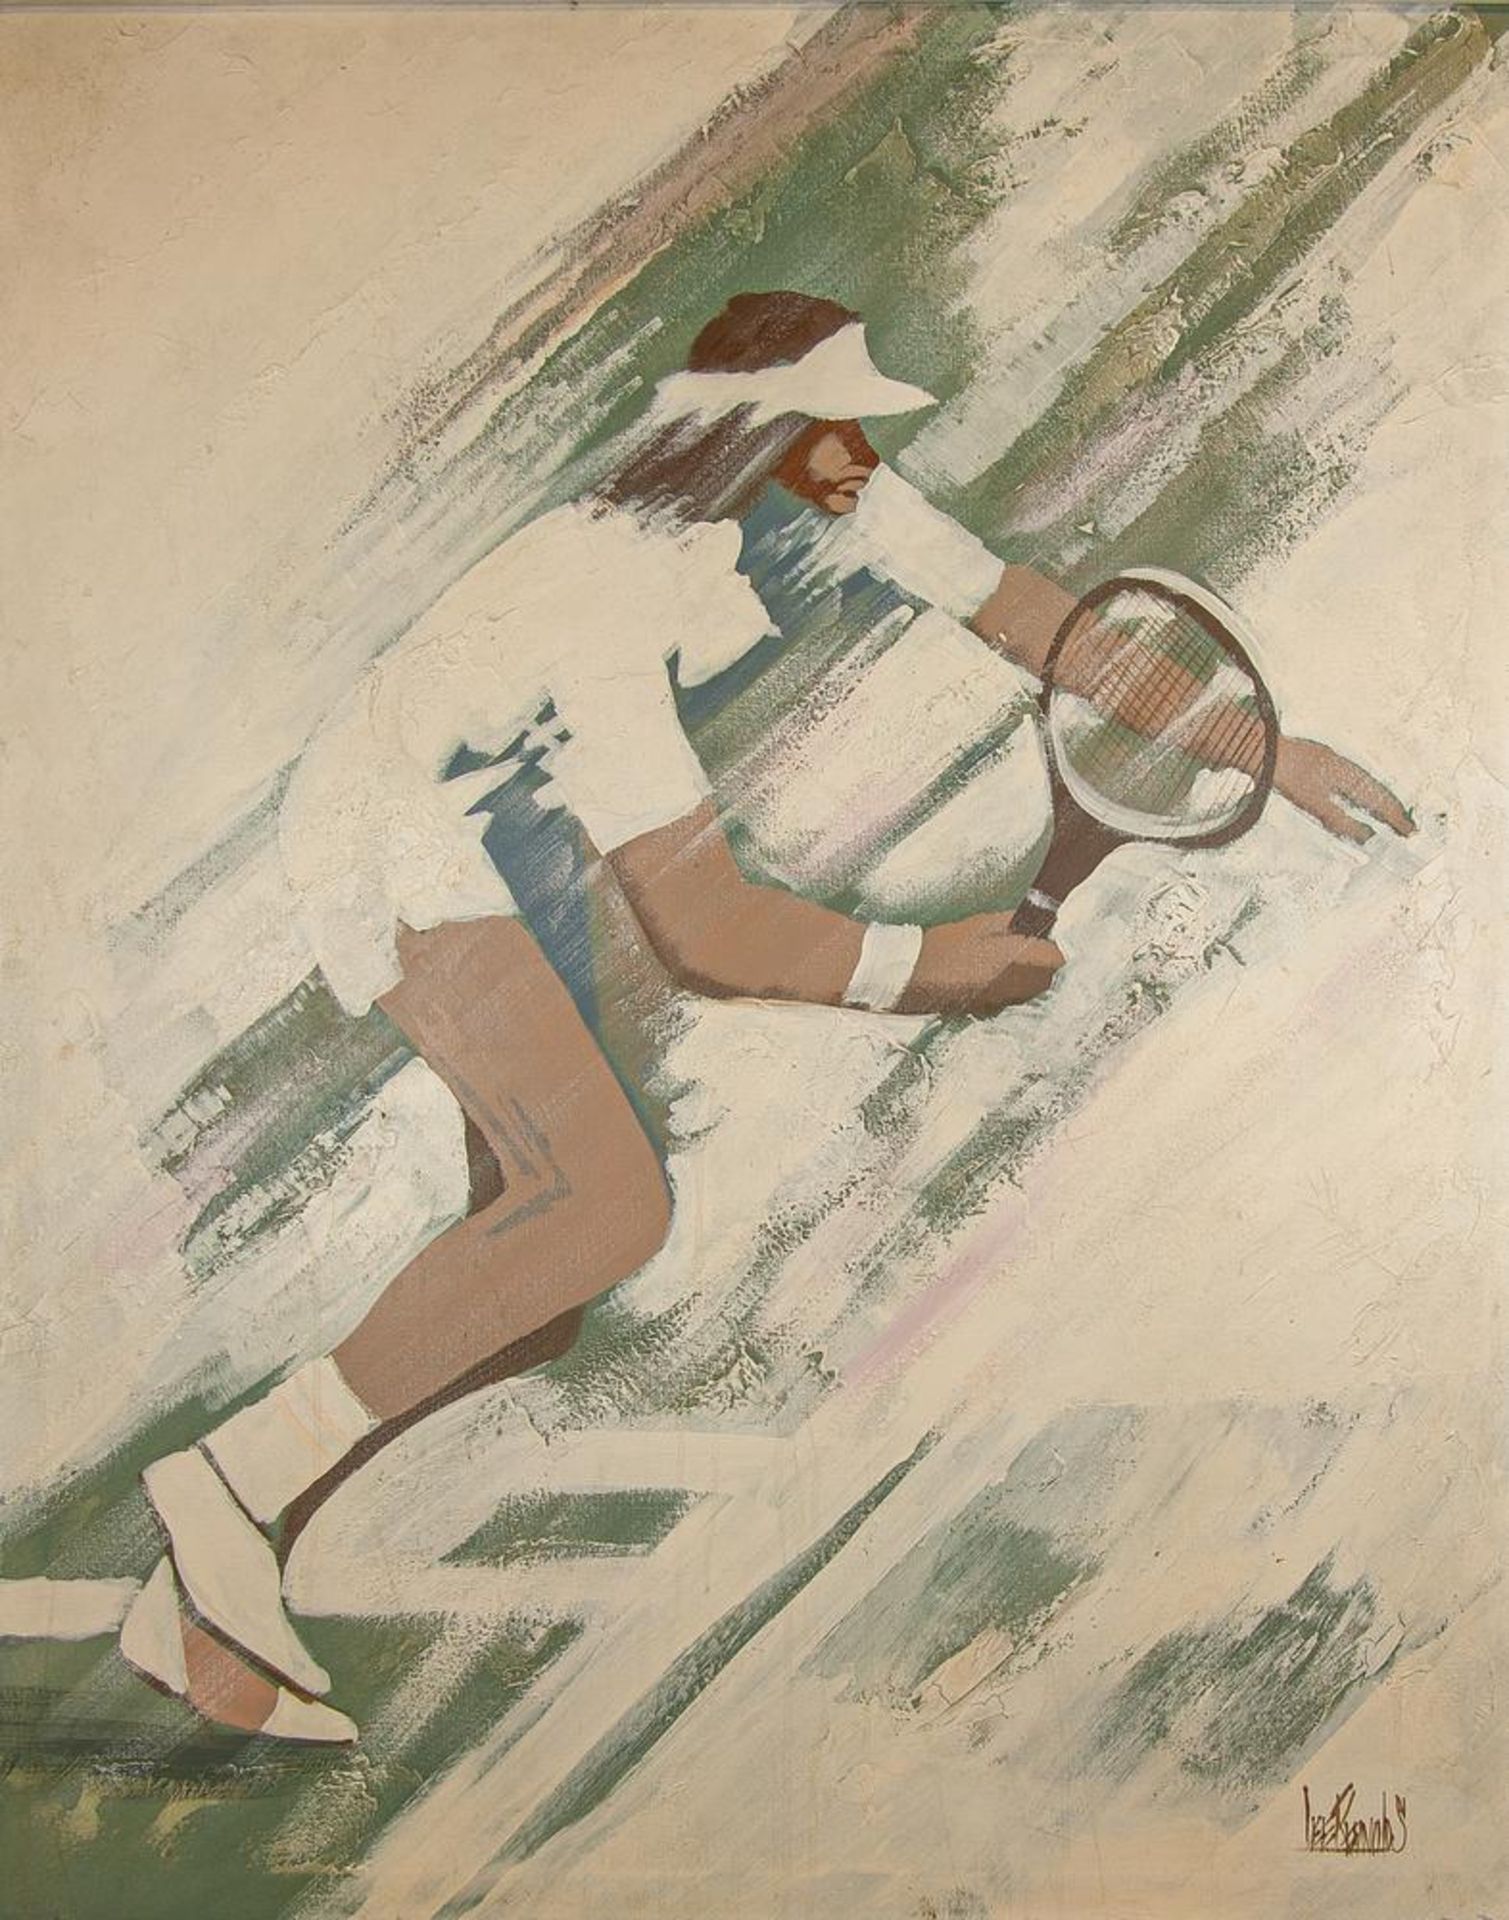 UNKNOWN ARTIST, XX CENTURY - Tennis player Indistinctly signed ‘Ive Tonolos’ [...]